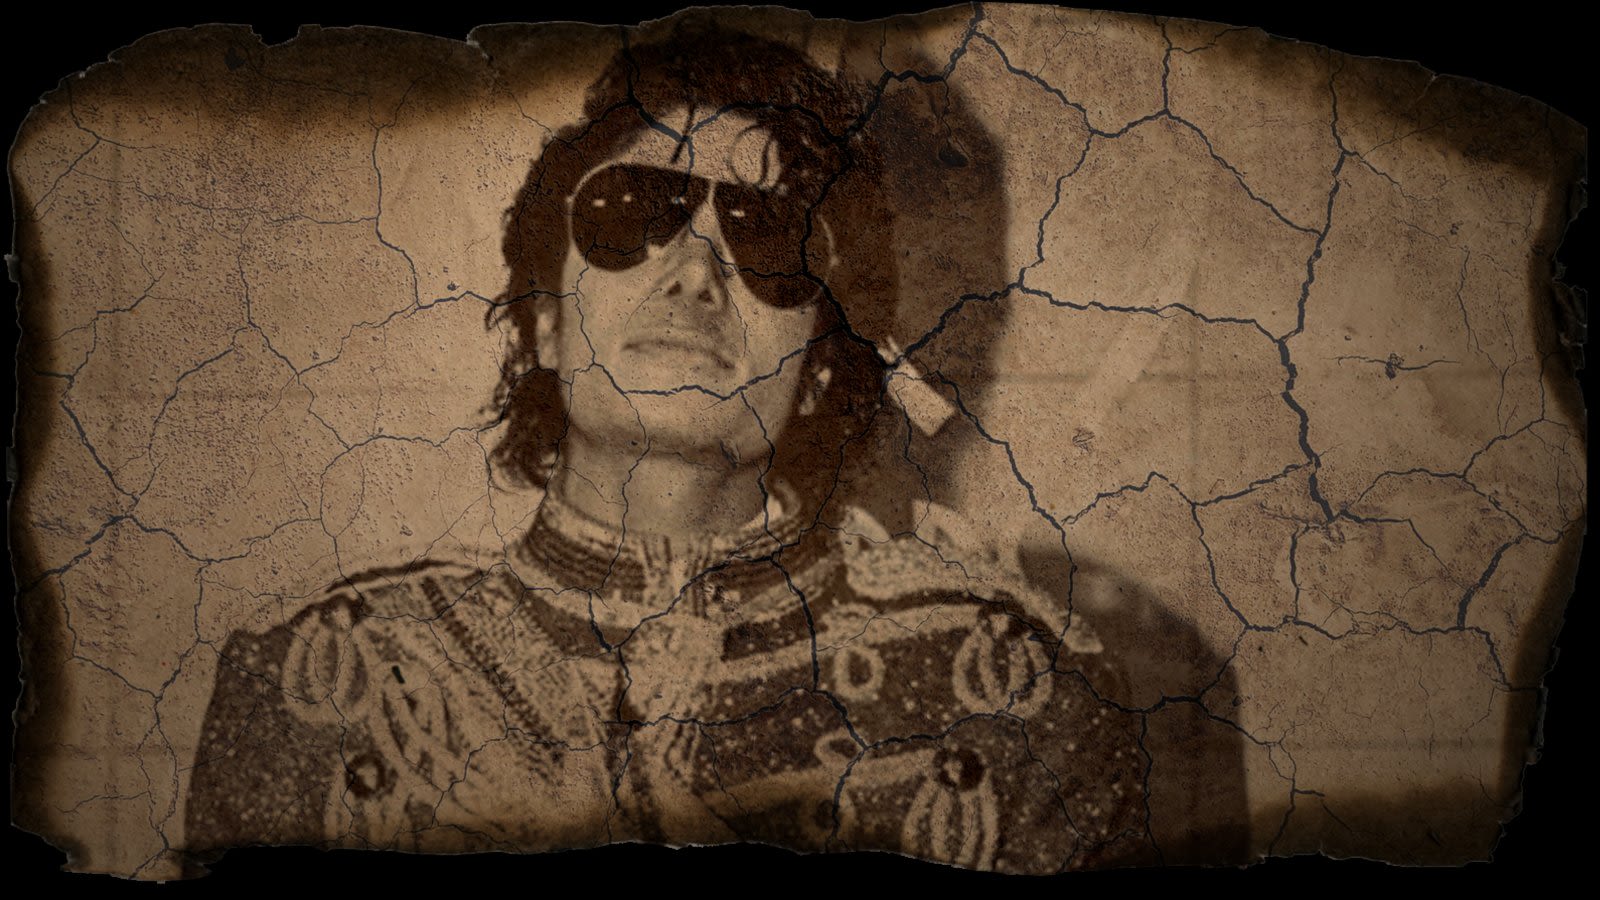 Michael Jackson News, In-Depth Articles, Pictures & Videos